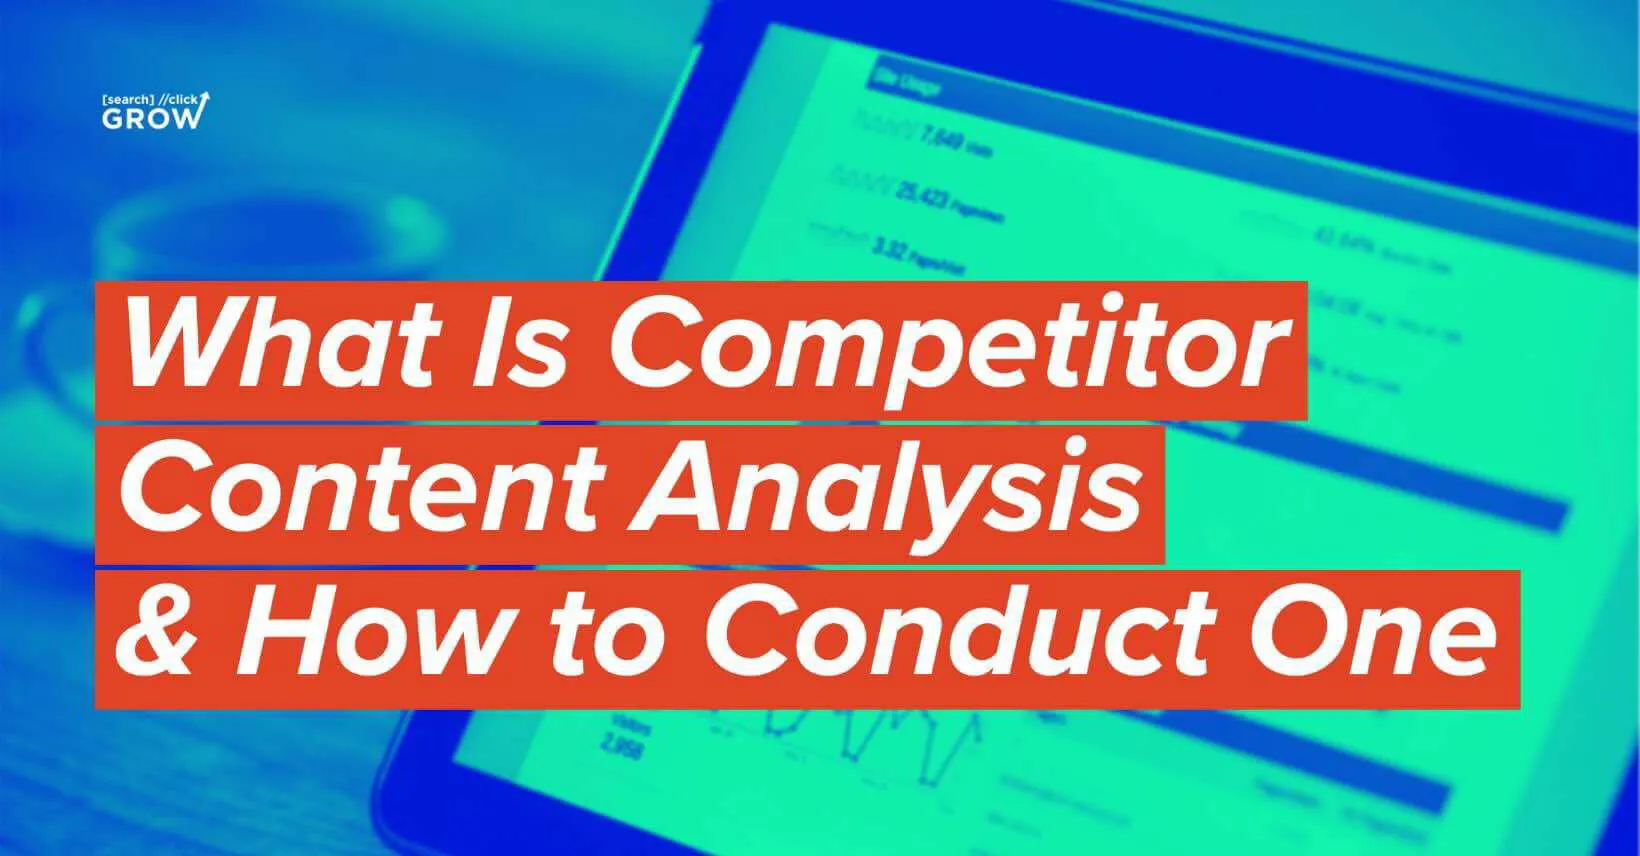 What Is Competitor Content Analysis and How to Conduct One